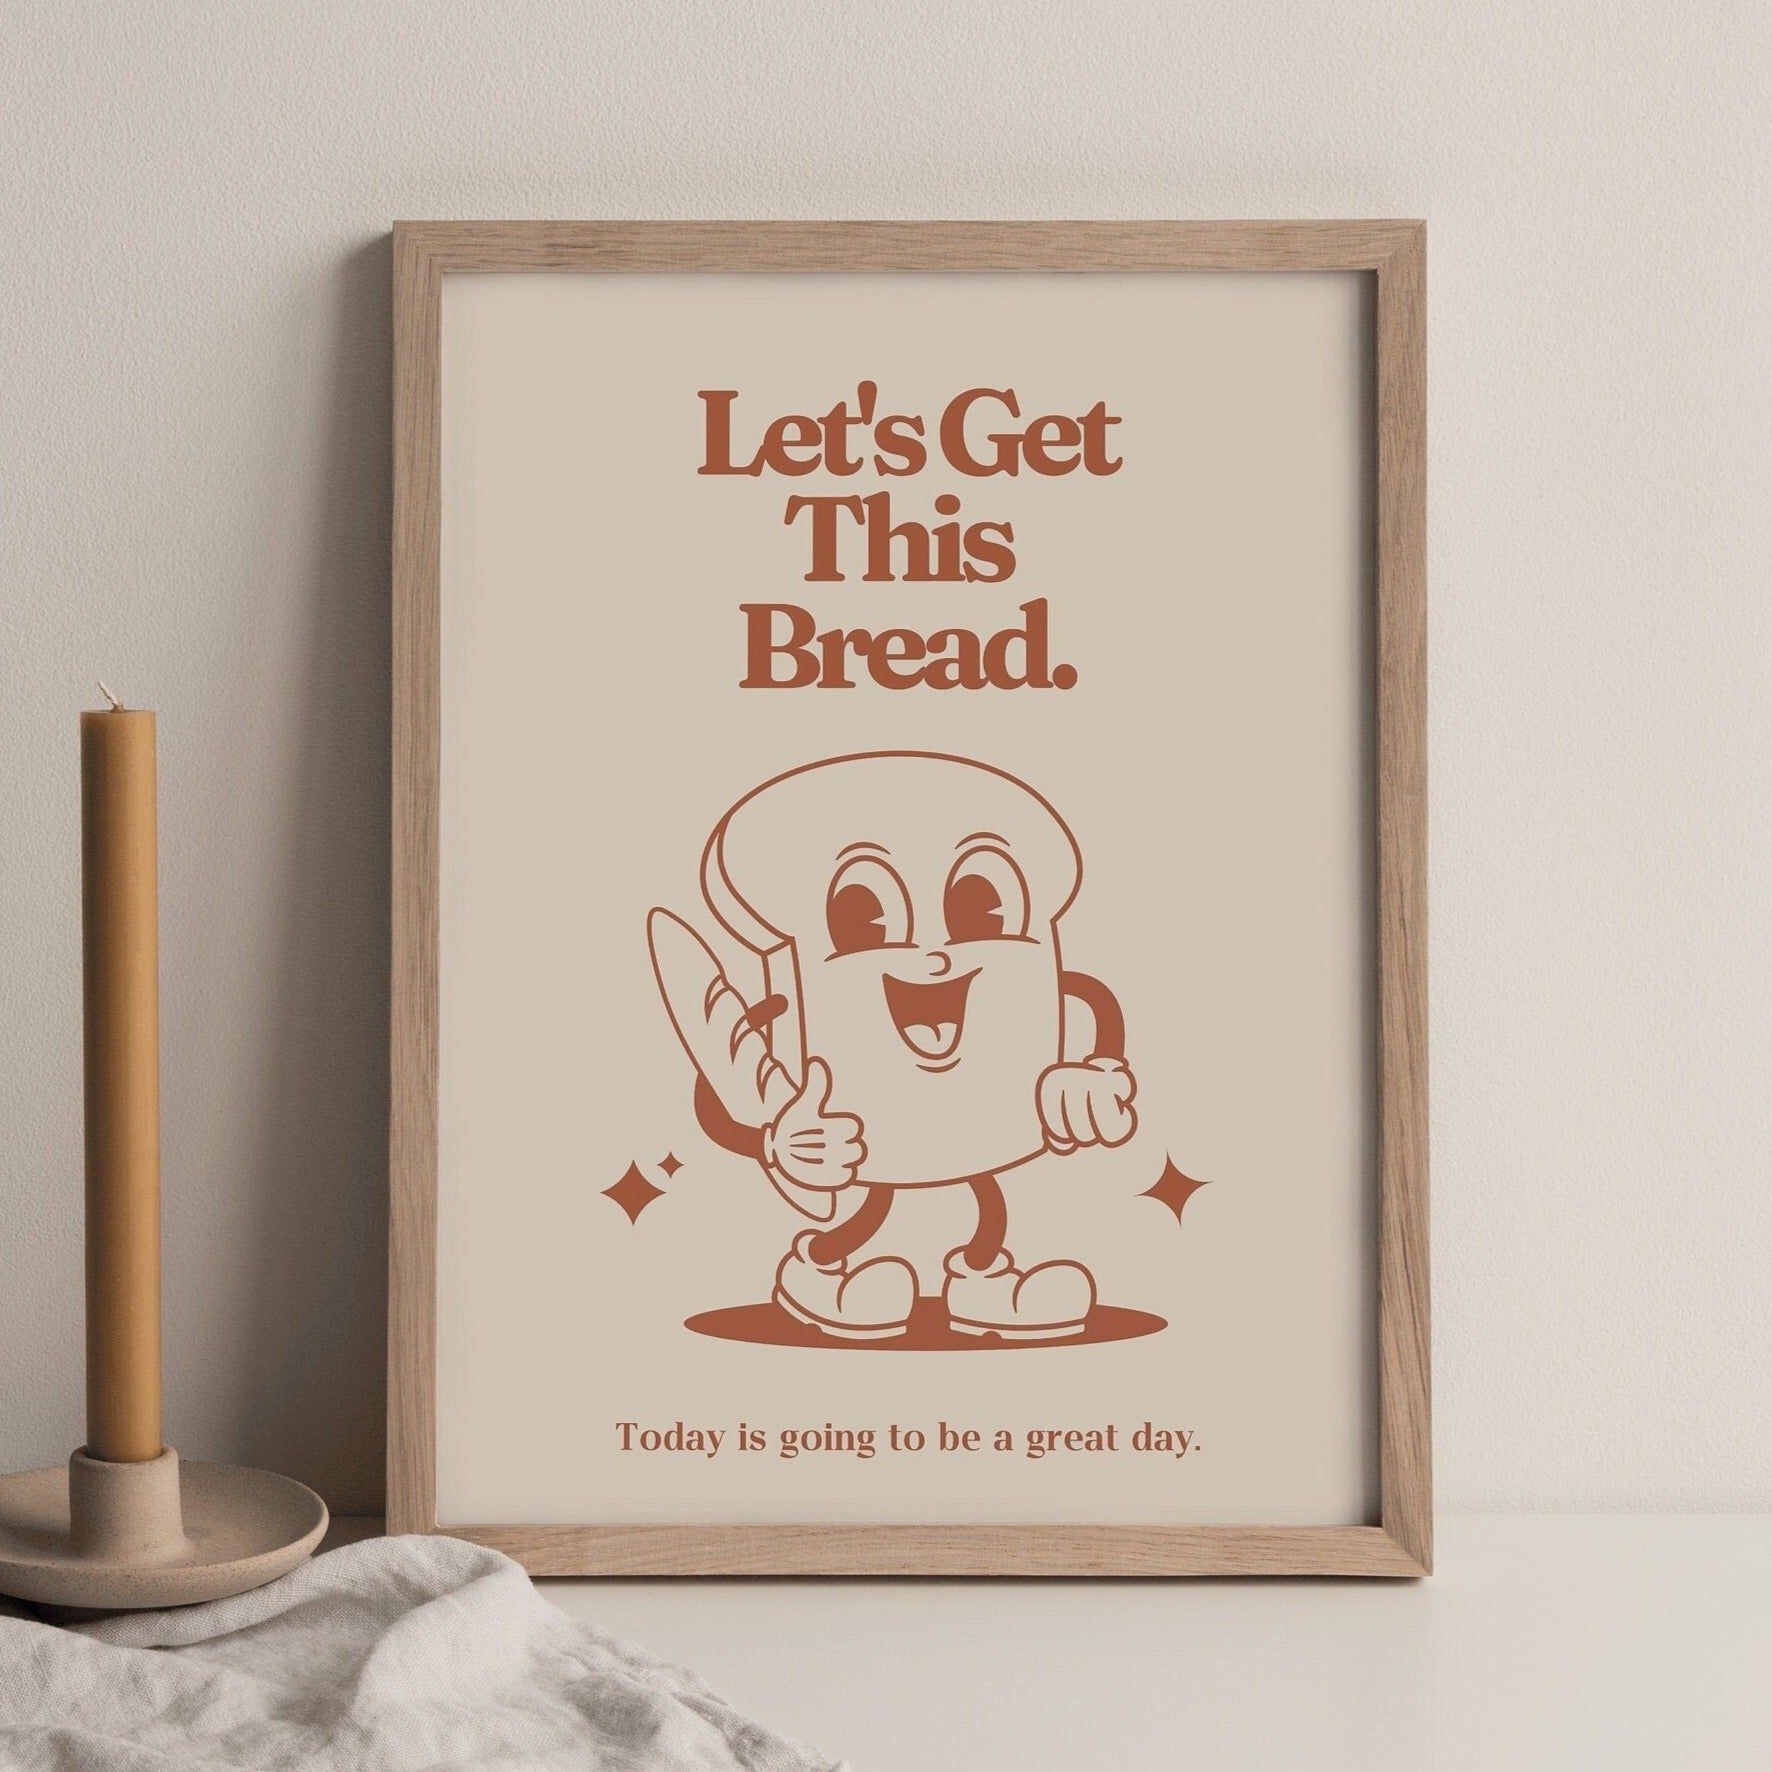 Retro Mascot Art PRINT, Let's Get This Bread, Motivational Kitchen Wall Art, Vintage Home Office Decor, Red and Beige Poster